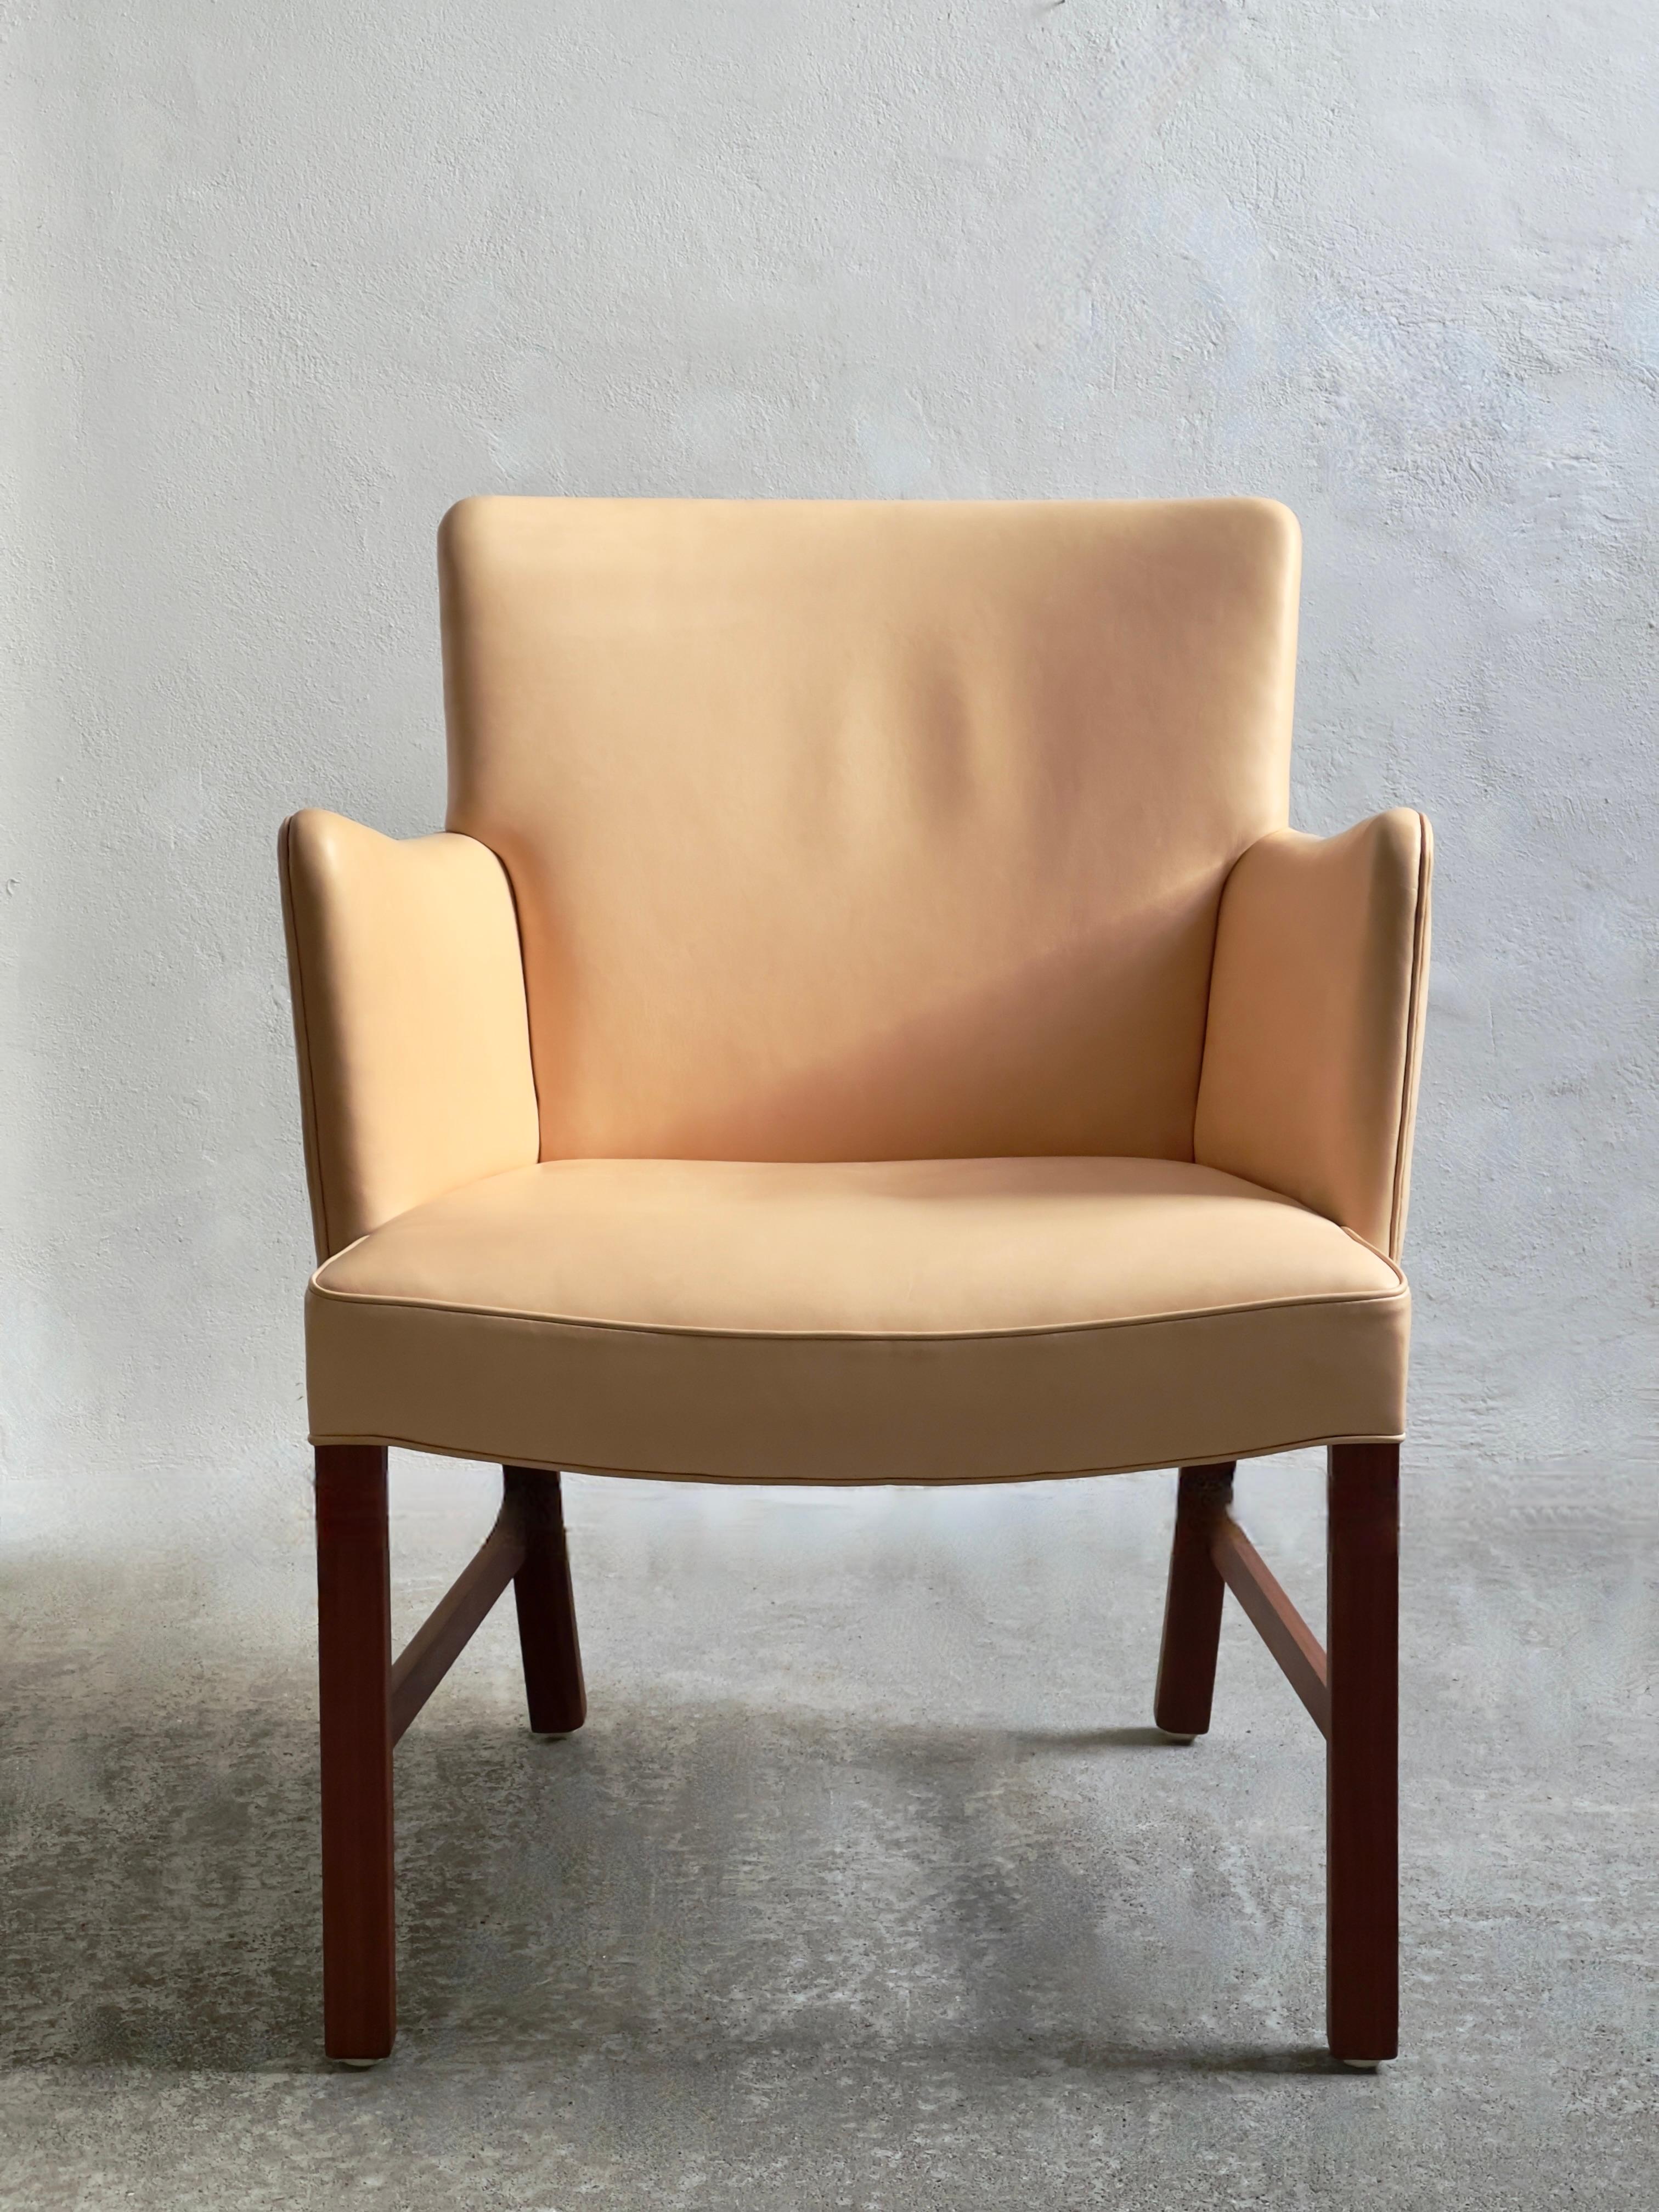 This Danish modern armchair by Jacob Kjaer, a revered master cabinet maker and modernist pioneer, embodies the essence of mid-century design sophistication. Crafted in 1960 in Copenhagen, it stands as a testament to Kjaer's innovative vision and